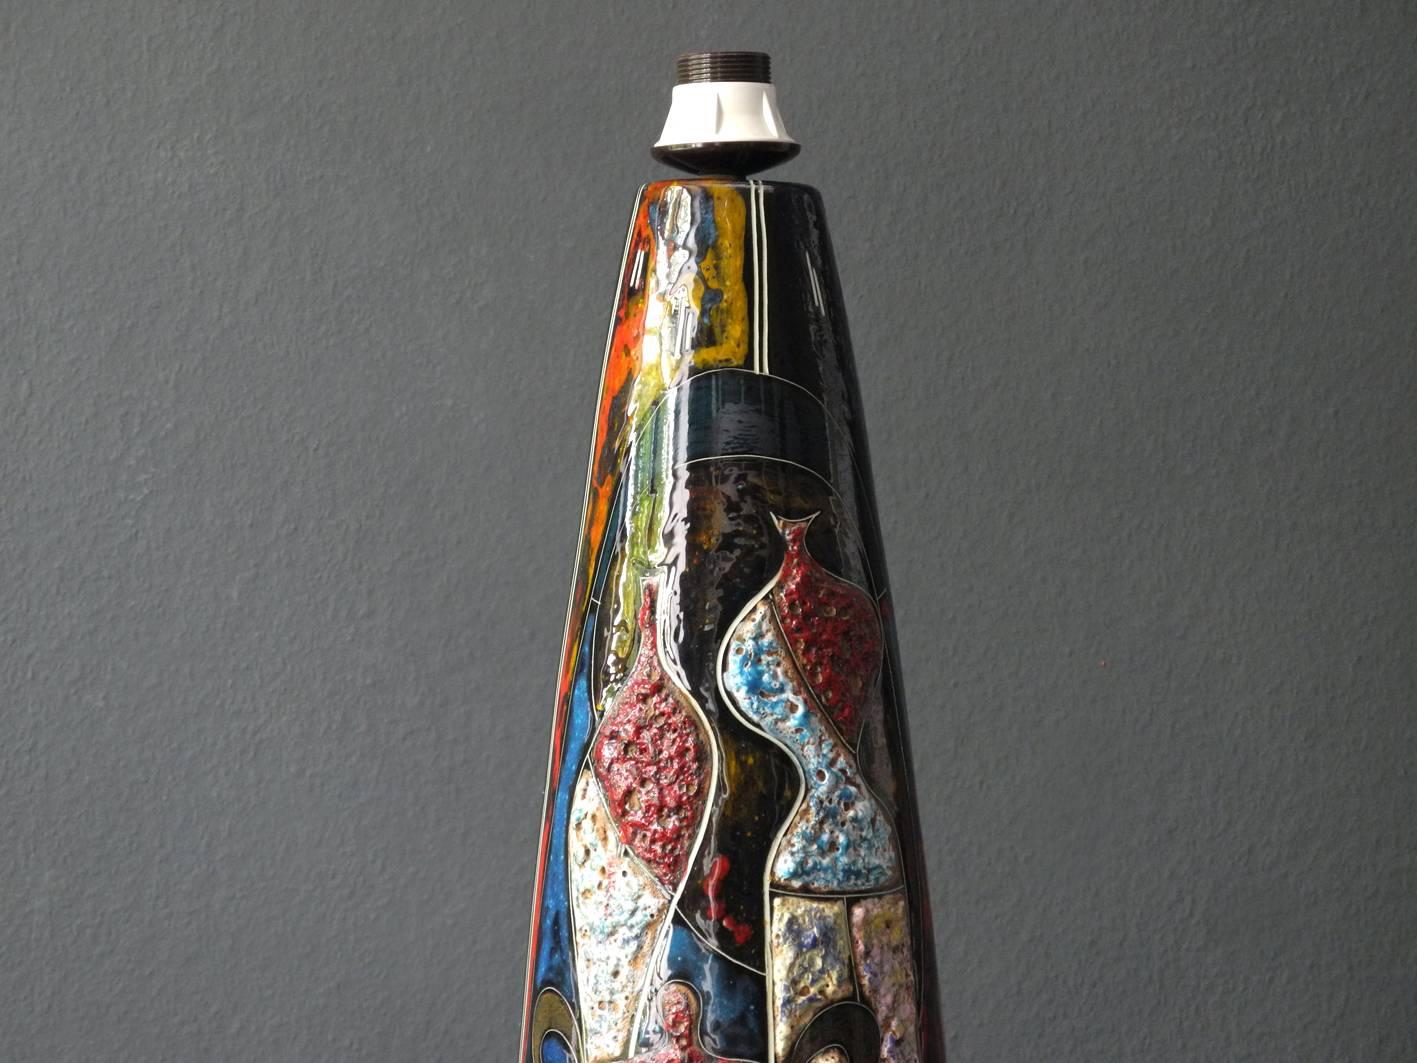 Handmade 1960s very nice huge colorful ceramic table or floor lamp.
Made by Melior. Made in Italy. Very nice rare design elaborately hand-painted and with the front side in lava design.
Can be used as a table lamp or as a floor lamp. Sale and